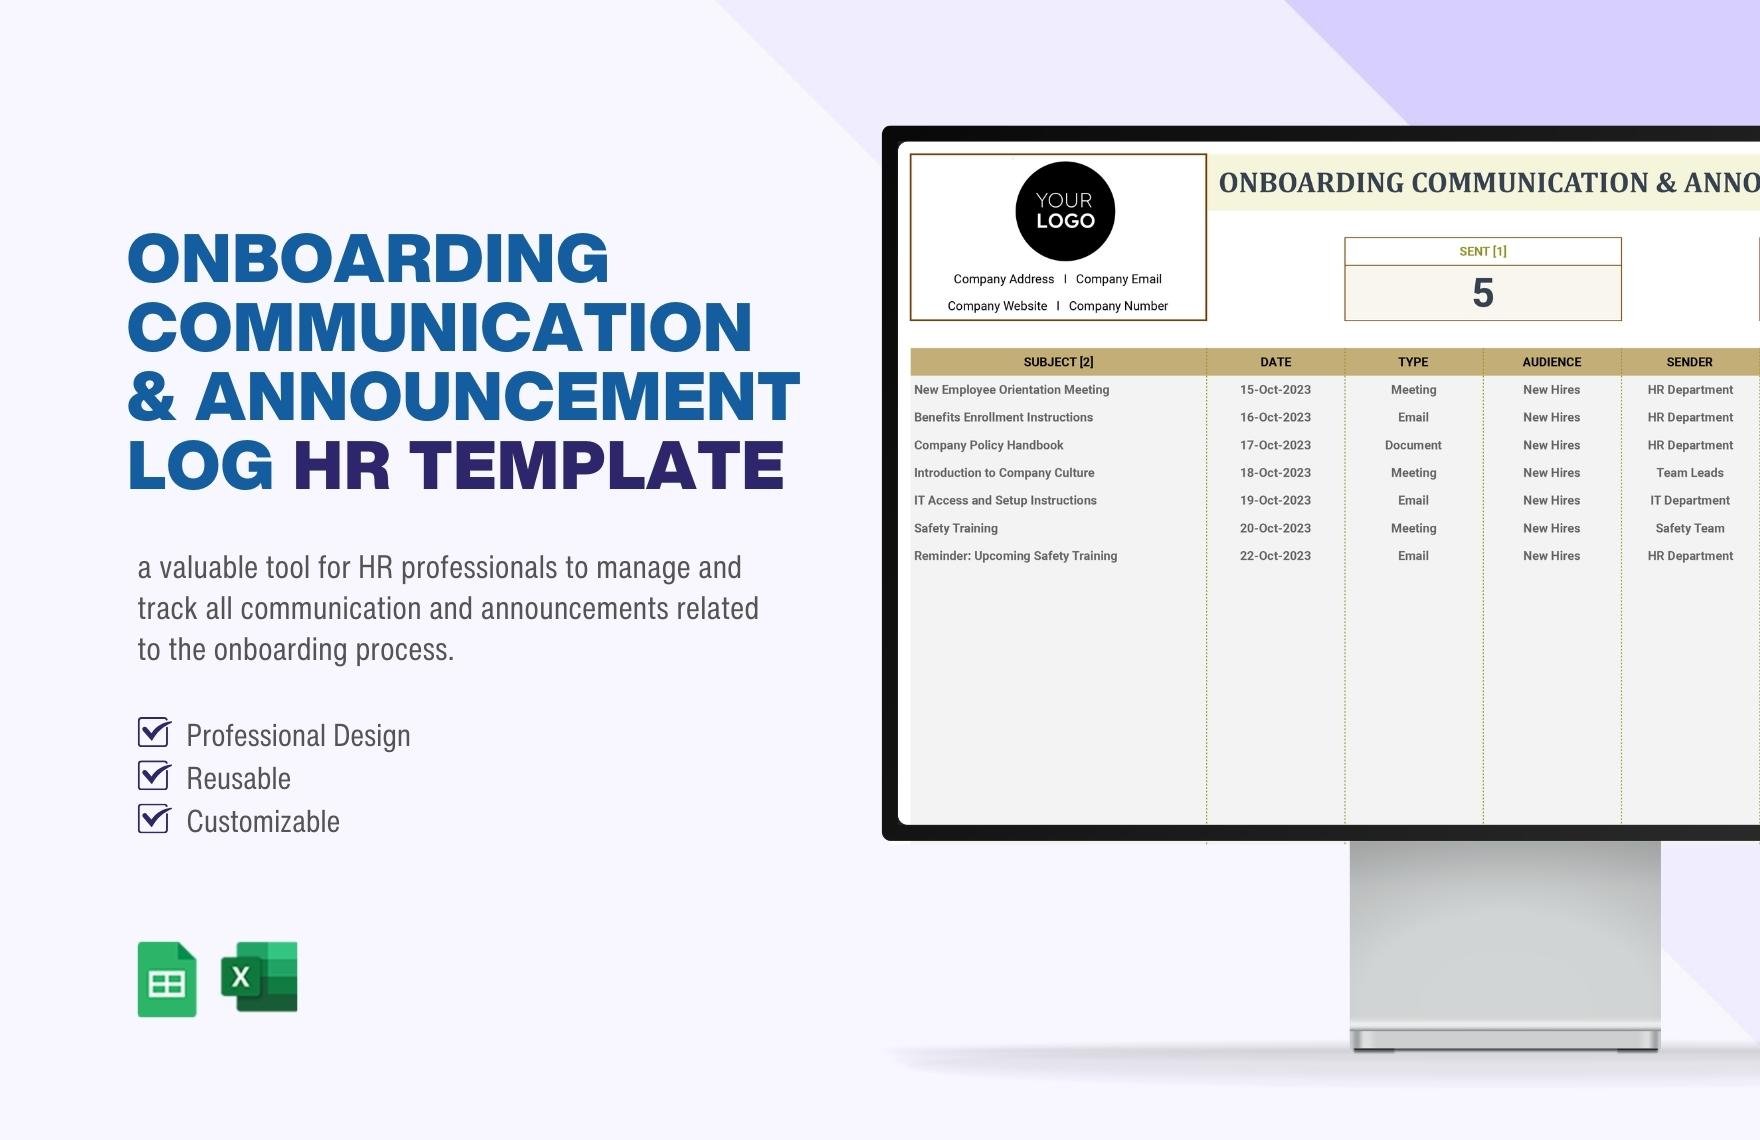 Onboarding Communication & Announcement Log HR Template in Excel, Google Sheets